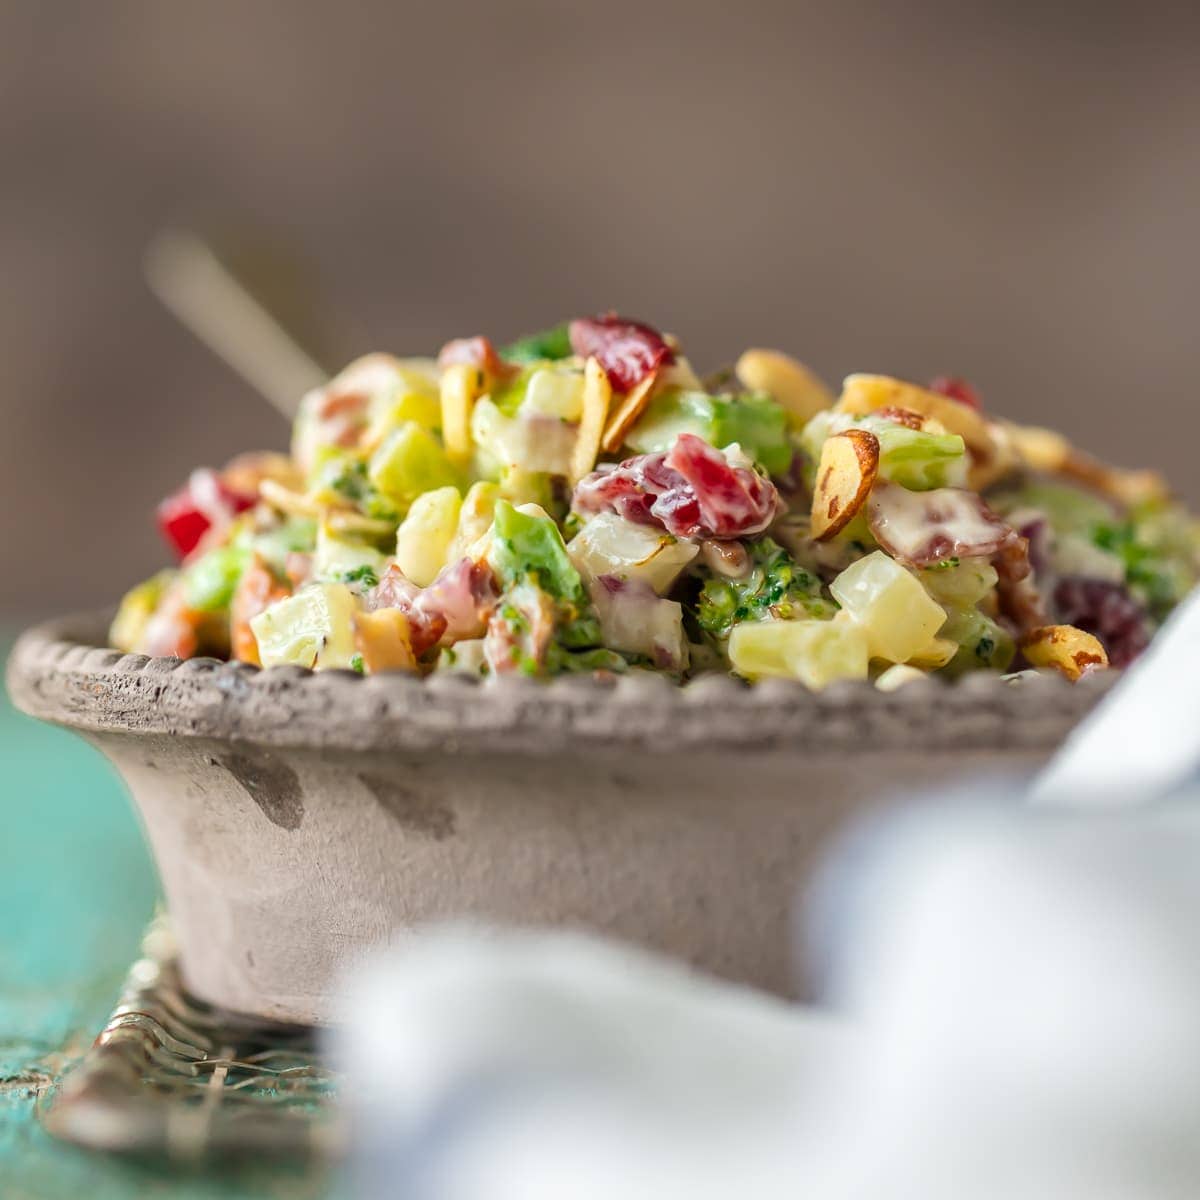 Cranberry Almond Charred Broccoli Salad with Bacon